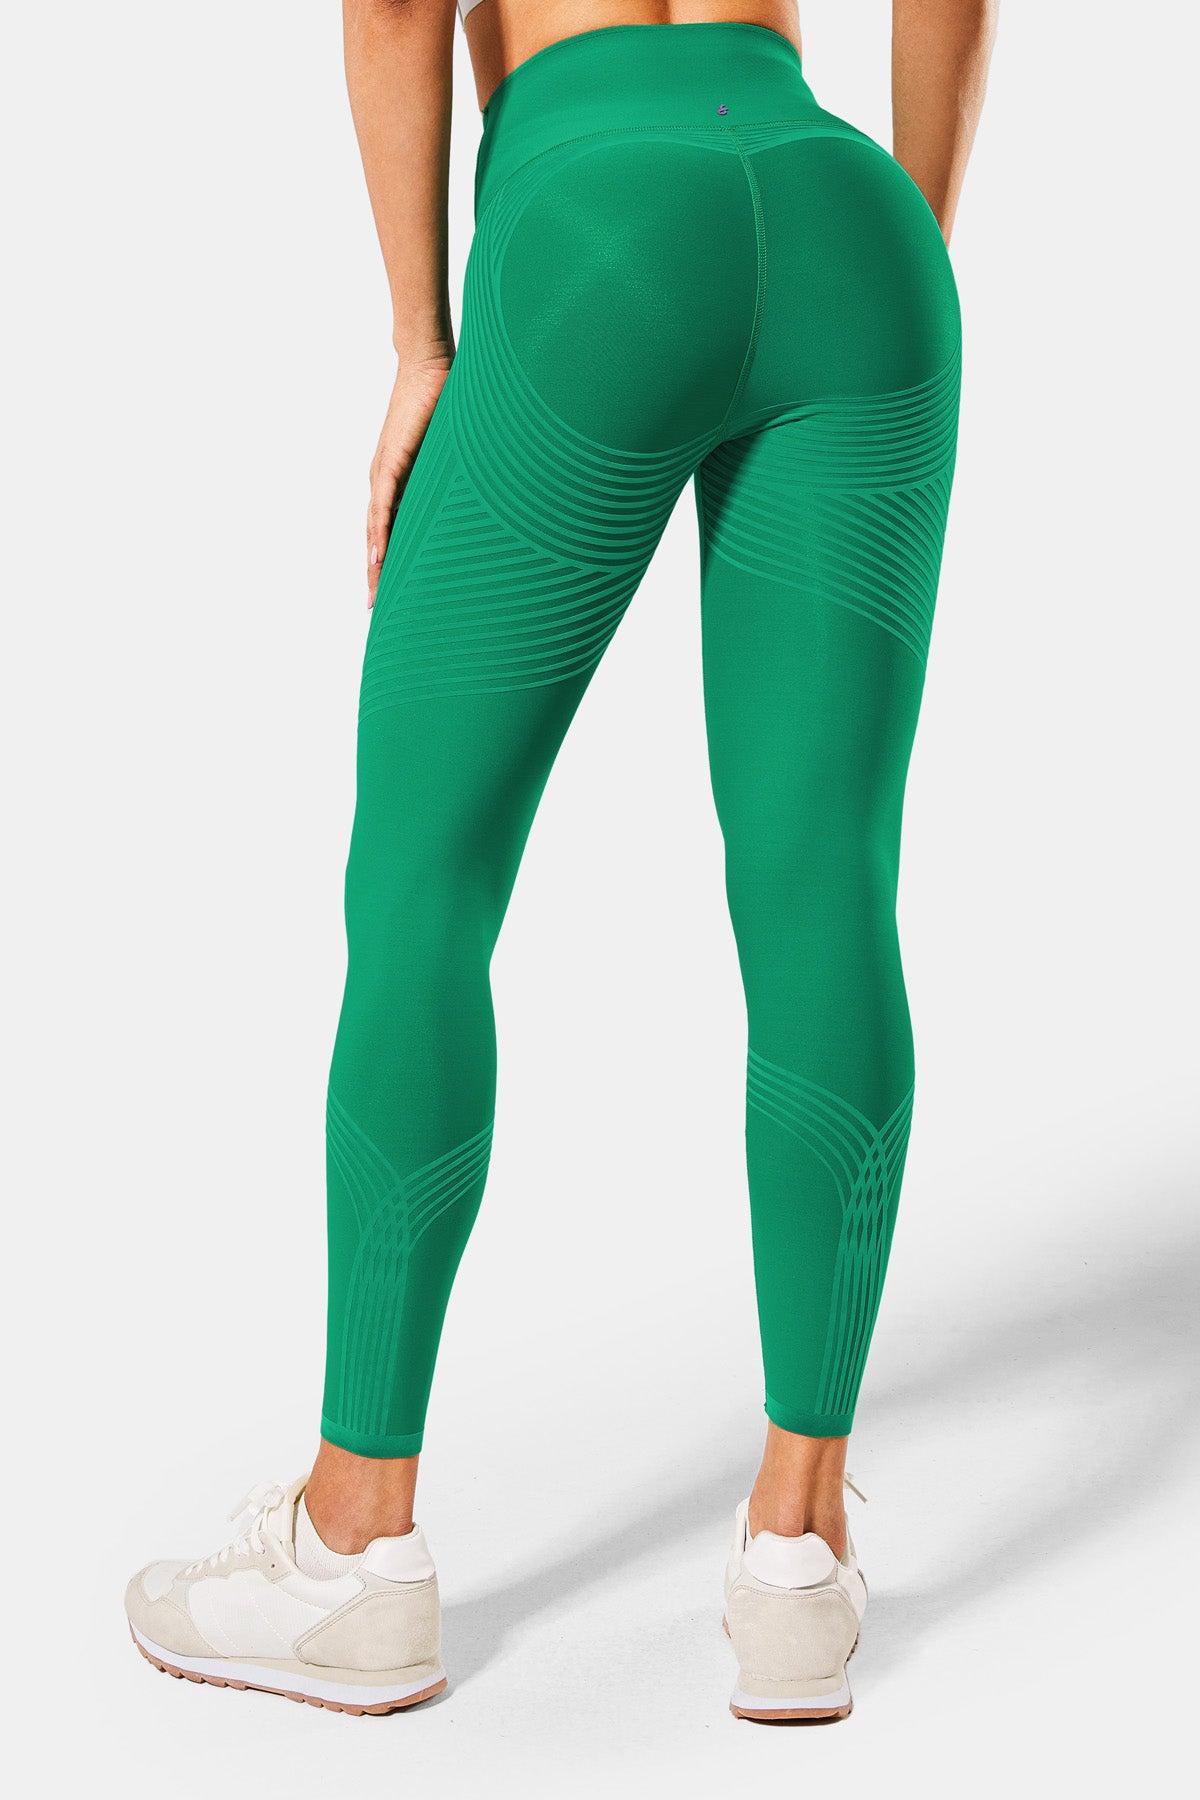 WomansHealthBlogs-Try These Compression Leggings Designed For Thick Th –  Fanka